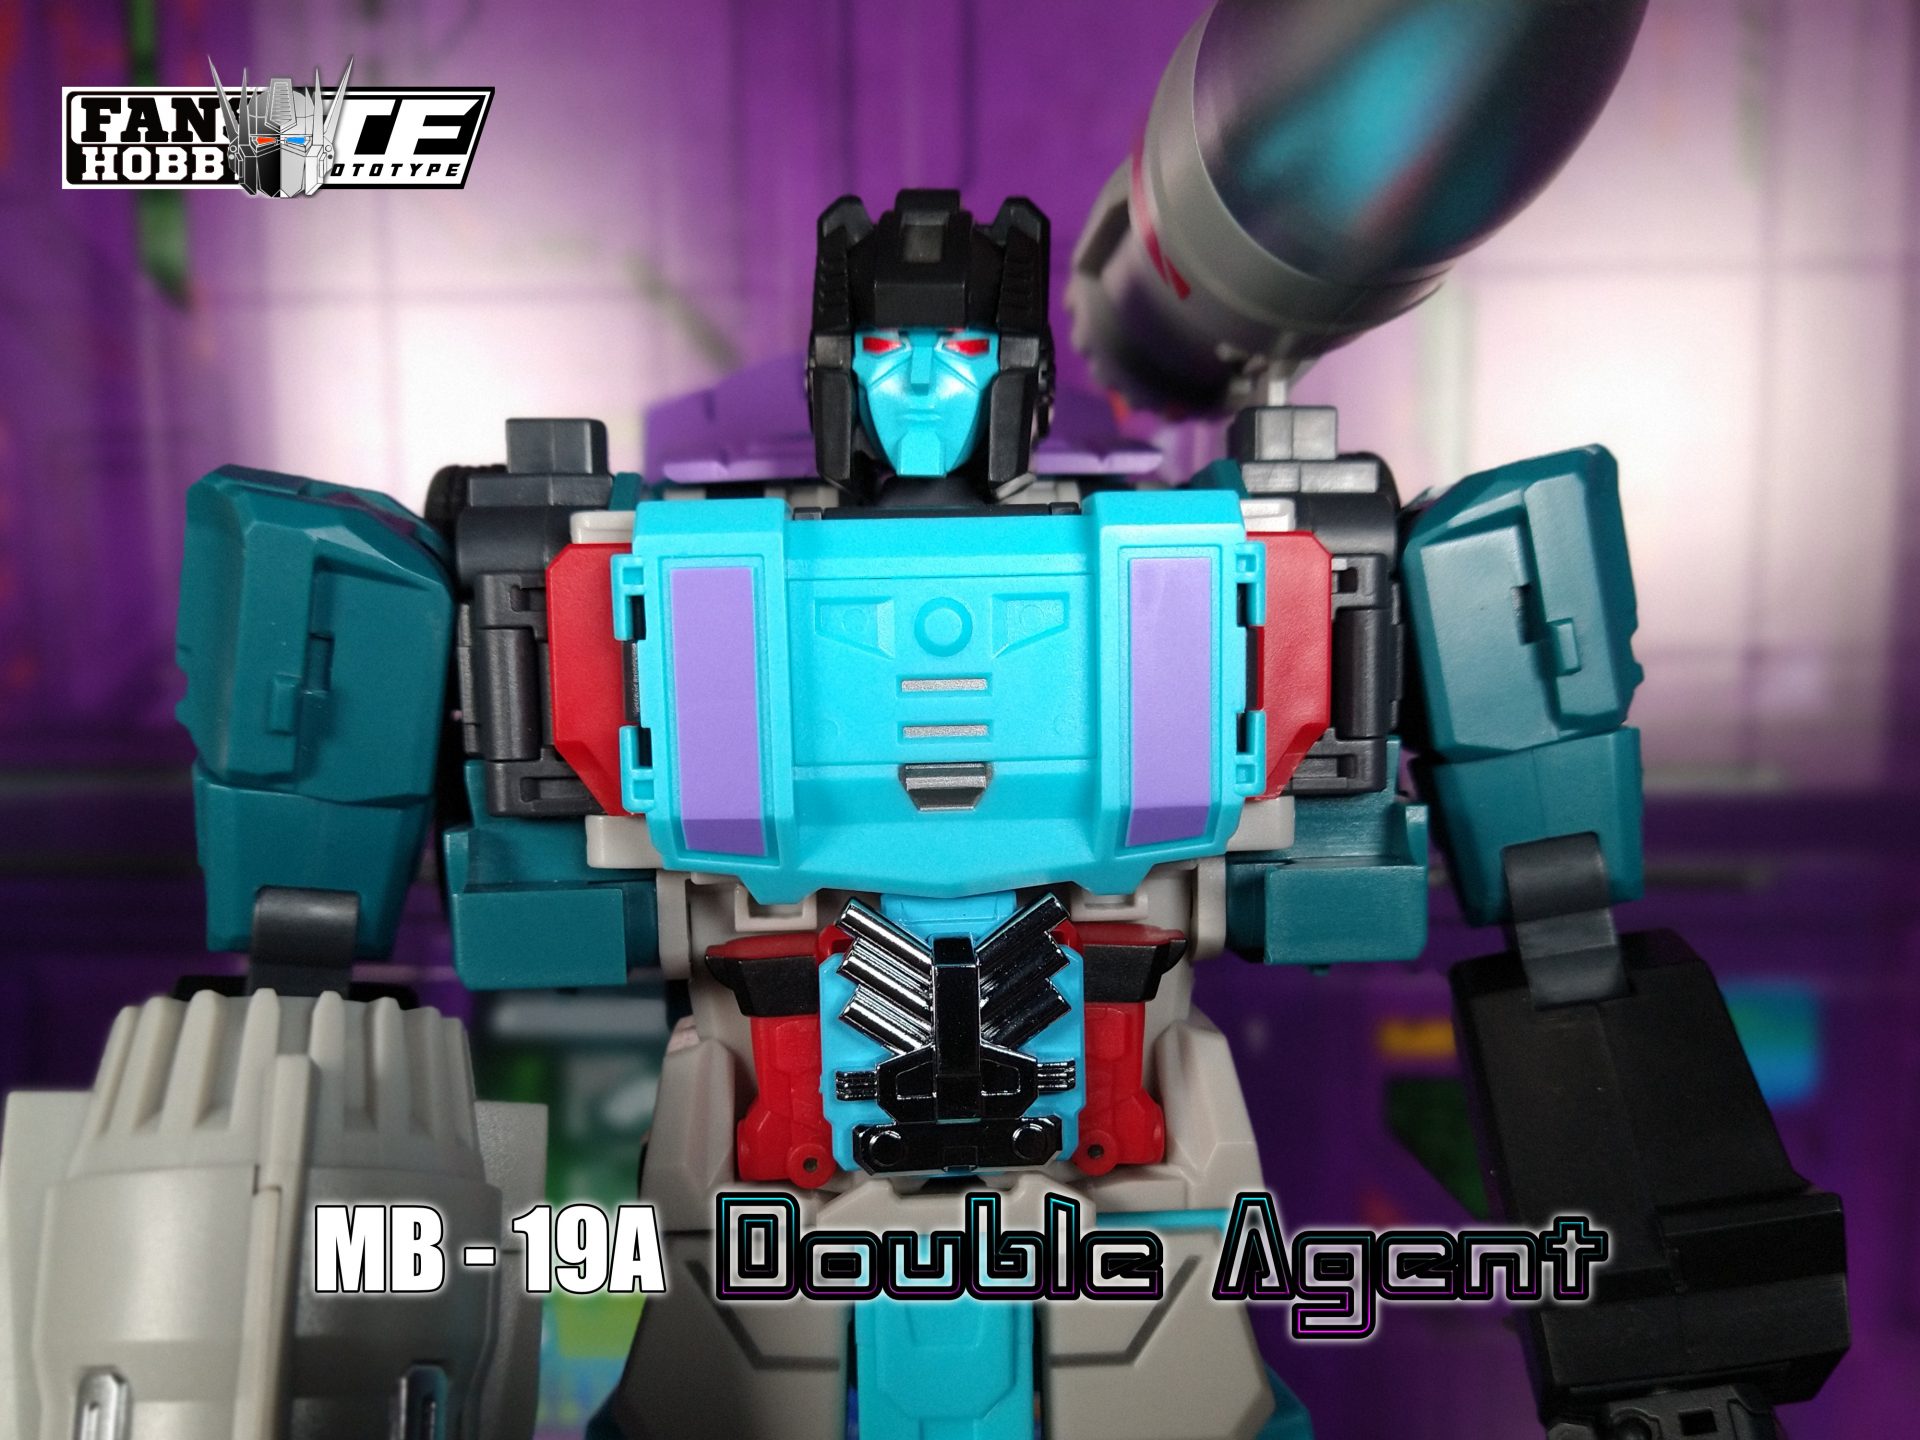 Fans Hobby MB-19A Double Agent photo by TFPrototype